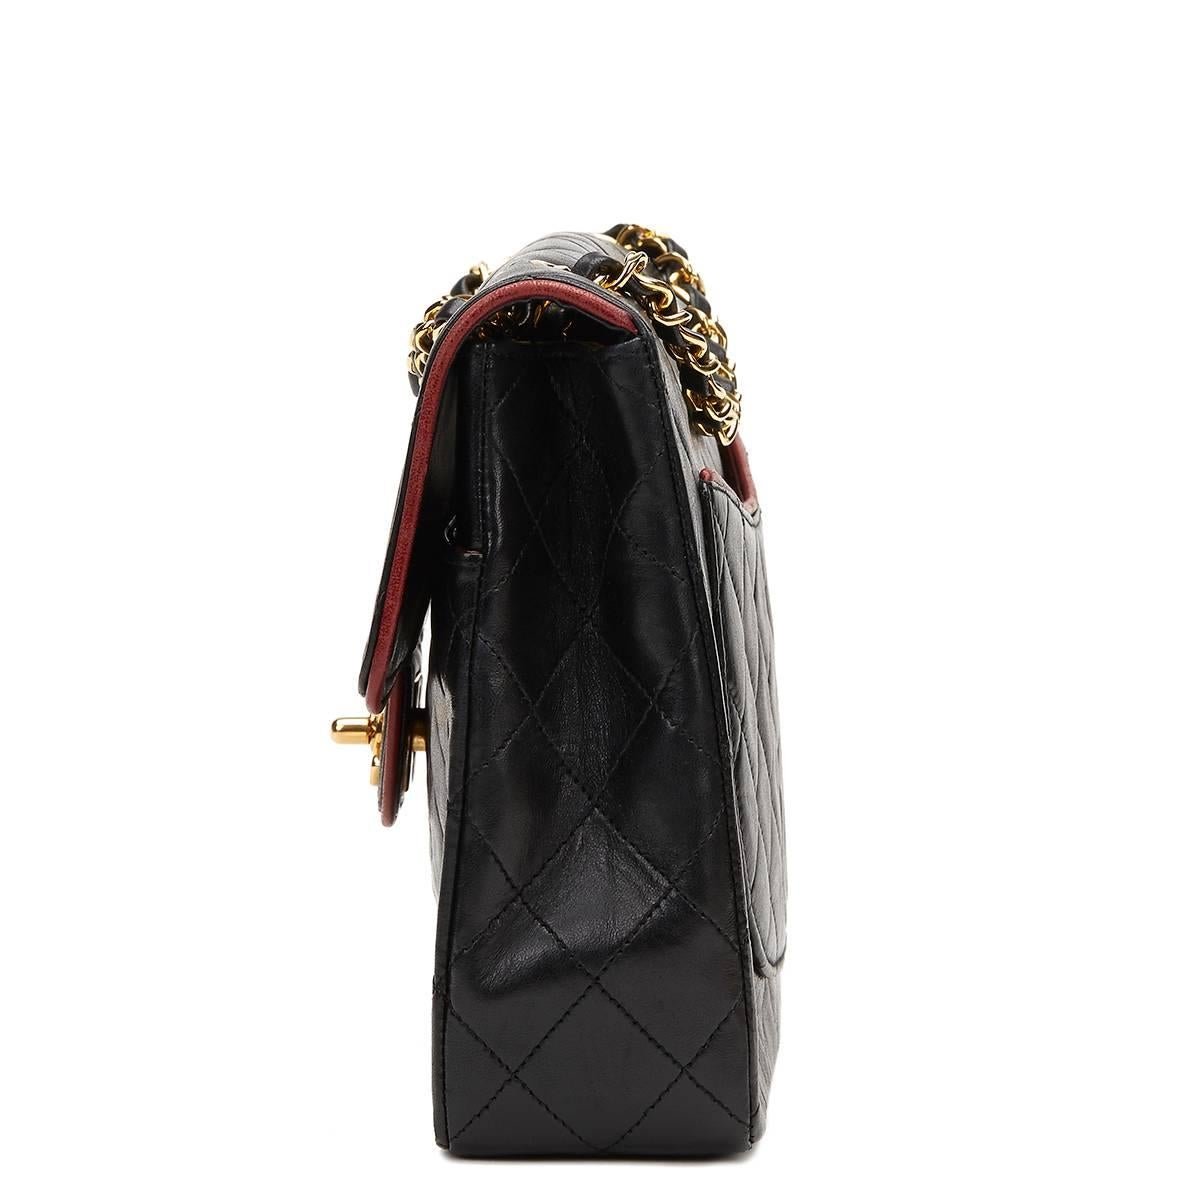 CHANEL
Black Quilted Lambskin Vintage Classic Single Flap Bag

This CHANEL Classic Single Flap Bag is in Excellent Pre-Owned Condition accompanied by Chanel Dust Bag, Box, Authenticity Card. Circa 1987. Primarily made from Lambskin Leather